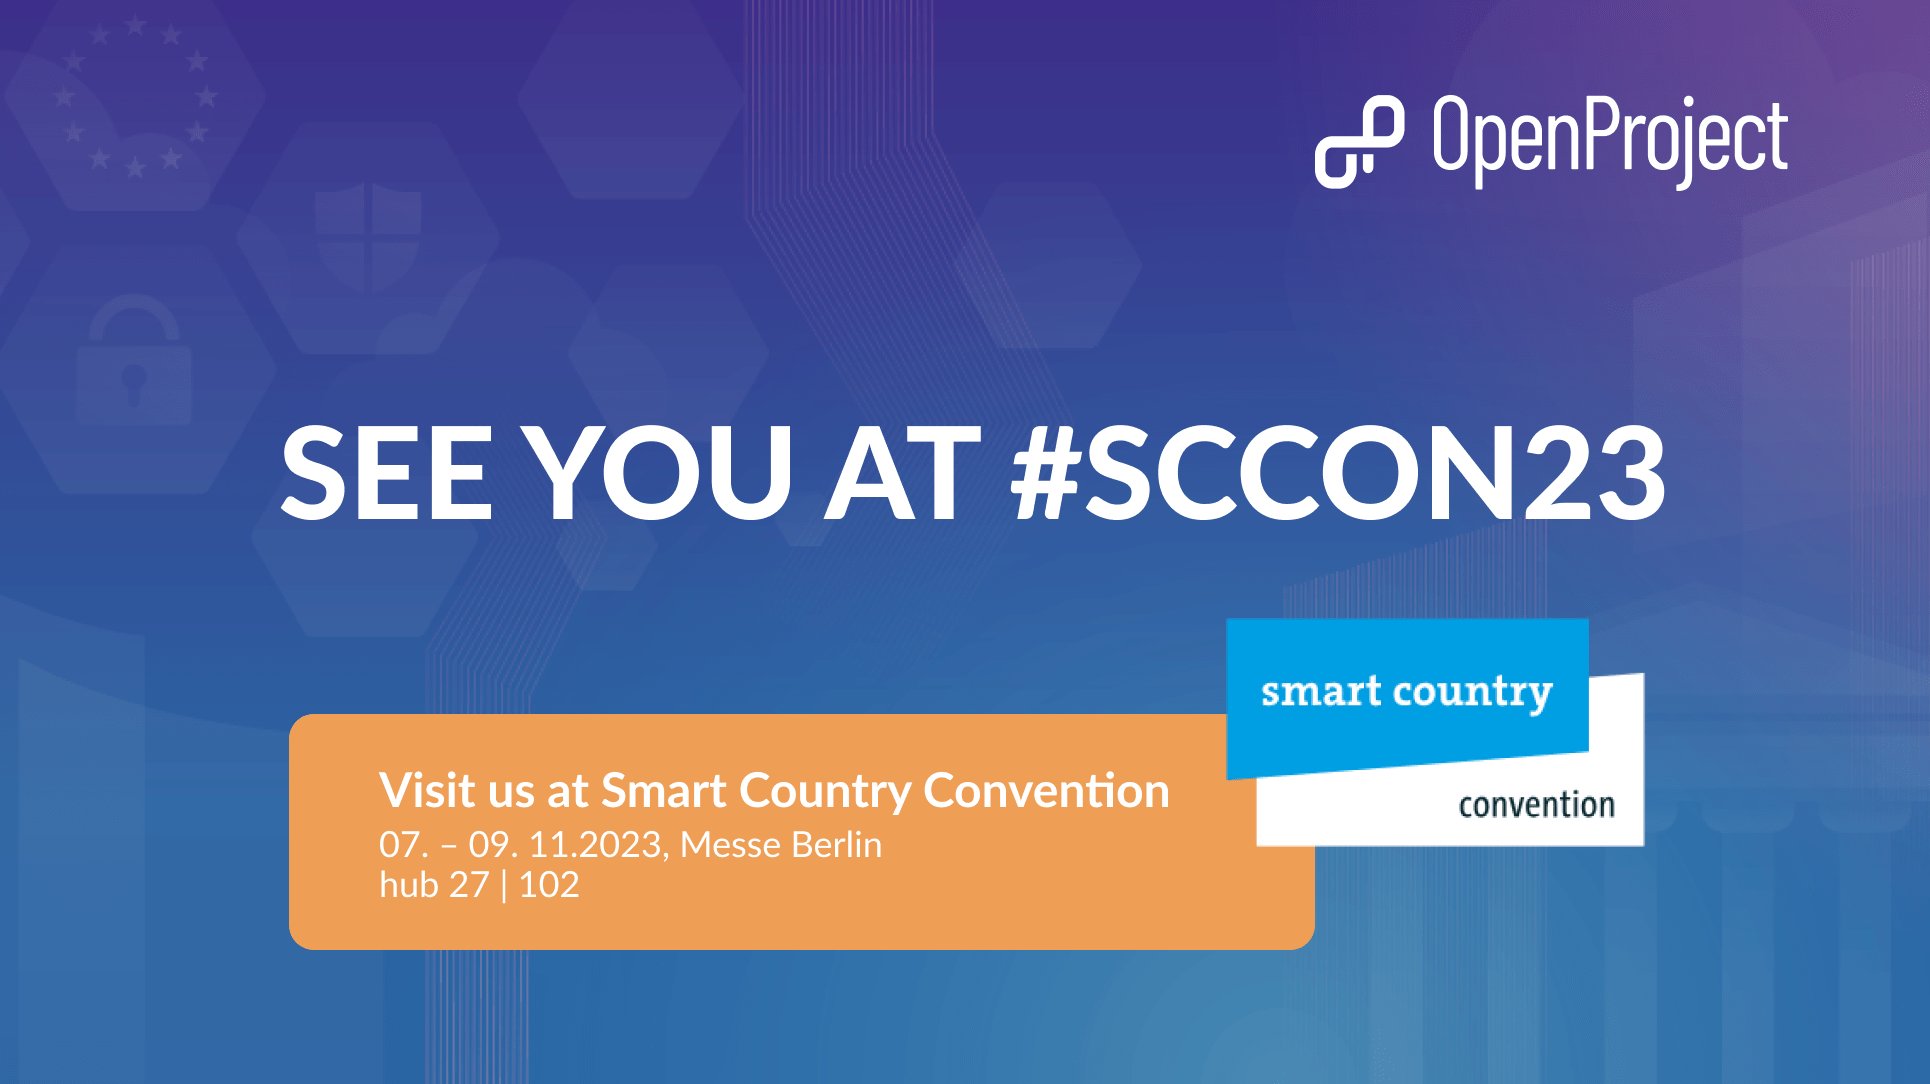 Meet us in Berlin at the Smart Country Convention 2023